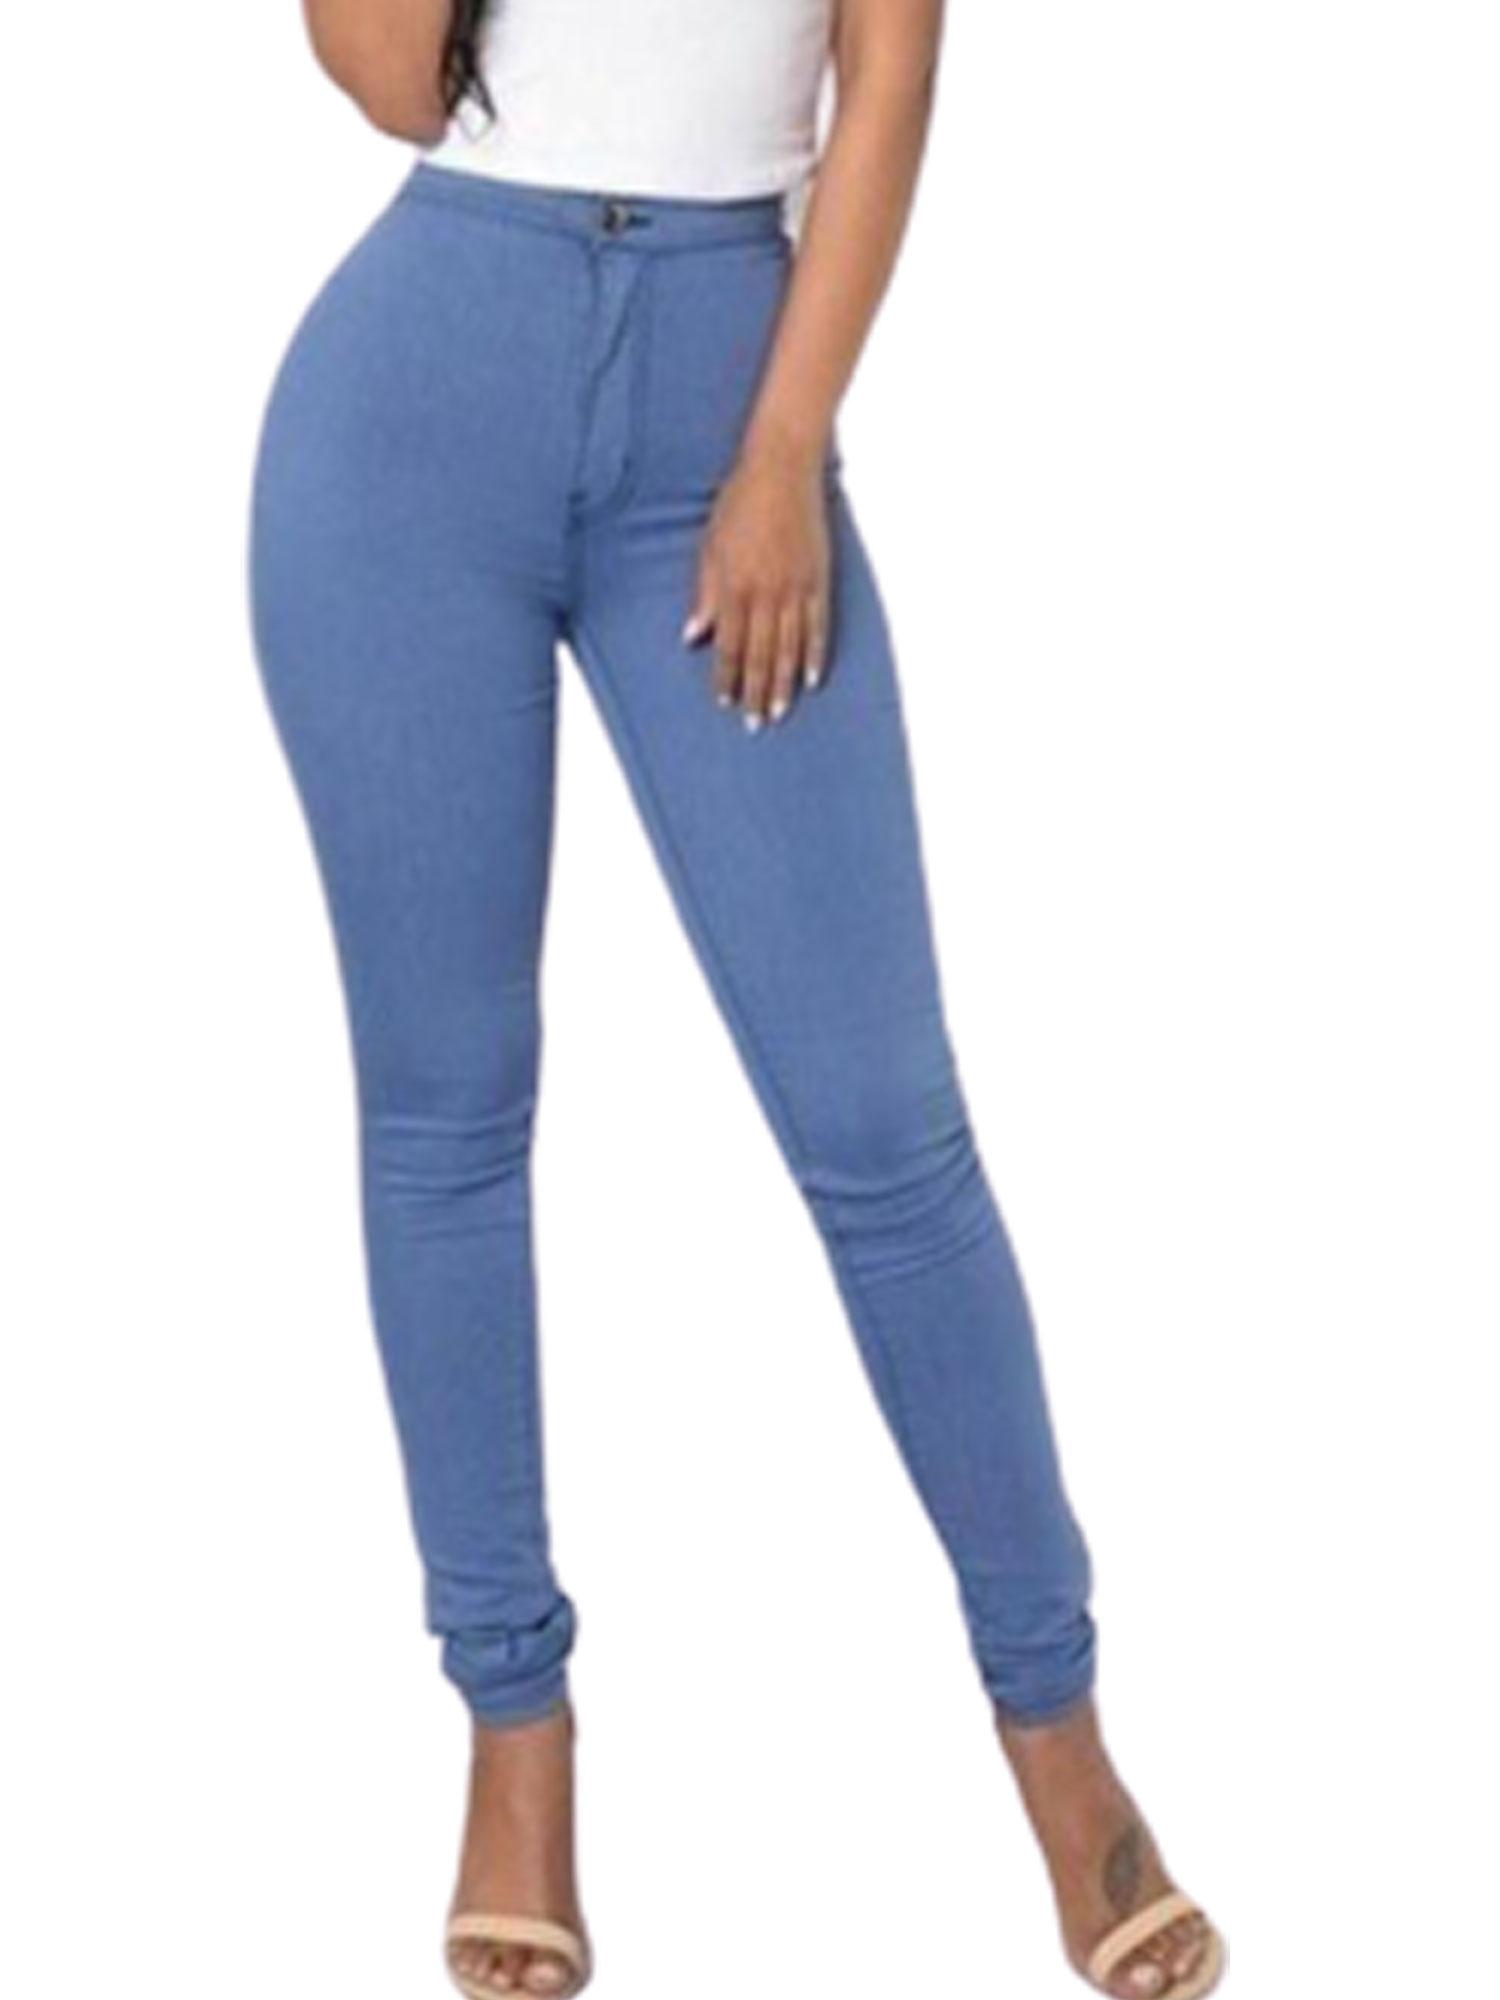 Emmababy Pencil Jeans Women Stretch Casual Denim Skinny Pants Lady High Waist Trousers - image 4 of 5